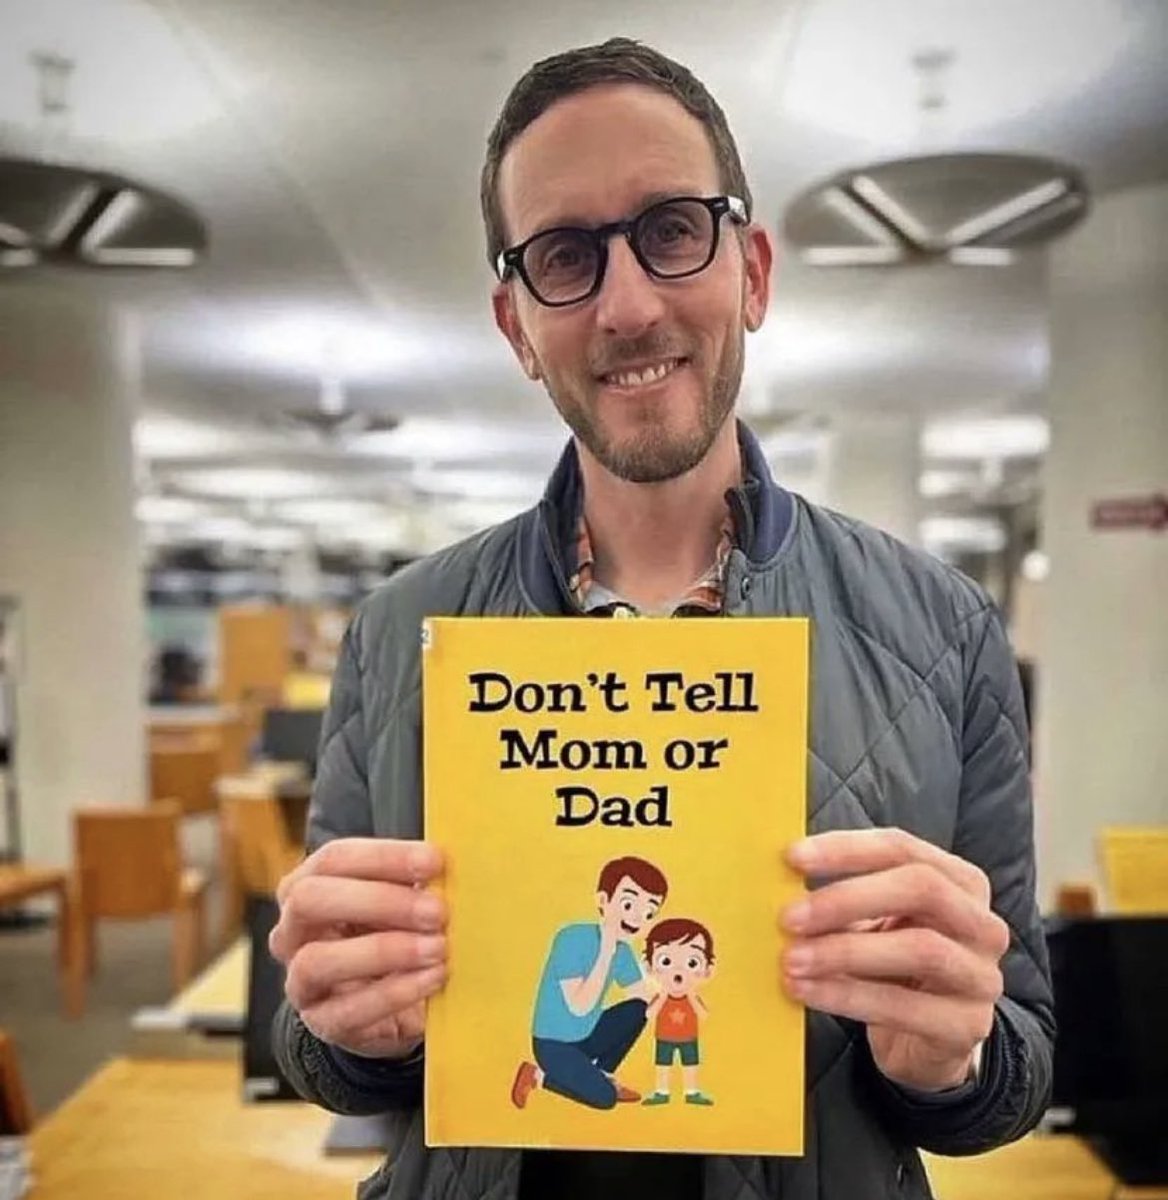 This asshole @Scott_Wiener passed bill SB 145 which makes ok to have sex with a minor 14 and older with their consent! This is fucking Pedophilia you scumbag!